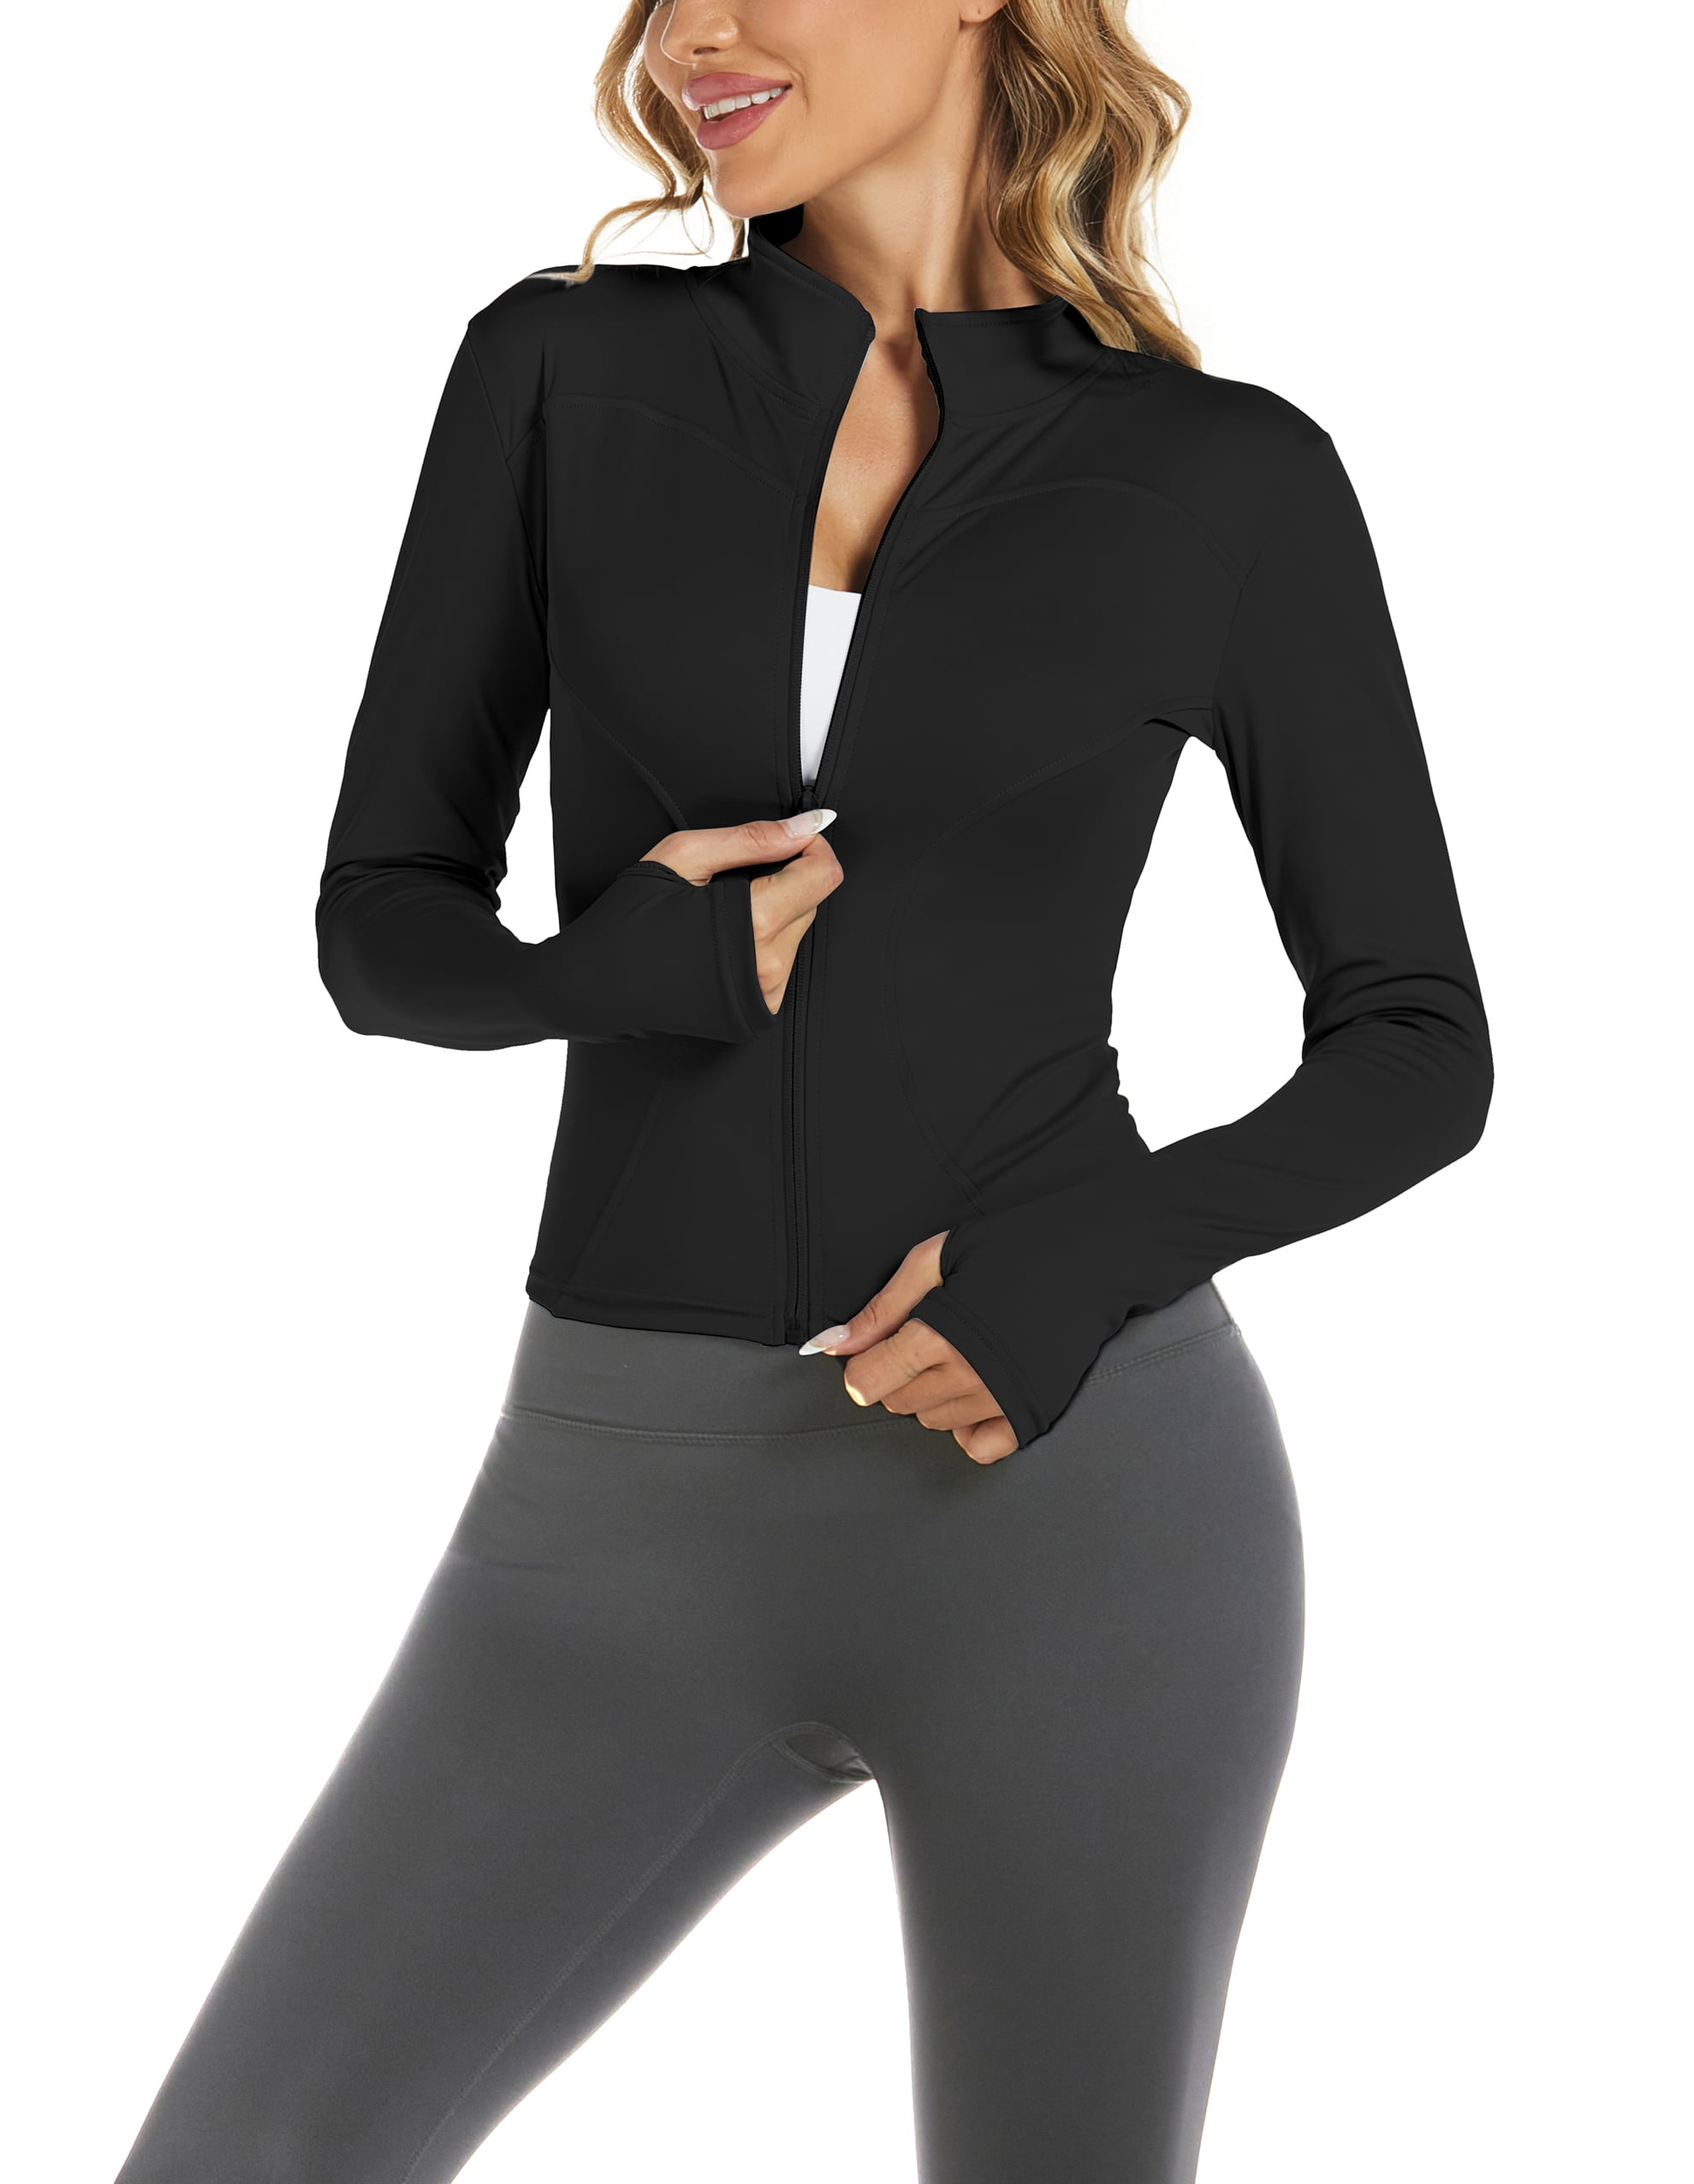 Aoouku Long Sleeve Running Jacket for Women Cropped Tops Tennis Shirts  Pullover Work out Outfits Gym Hiking Tight Fitted Tops Black S 